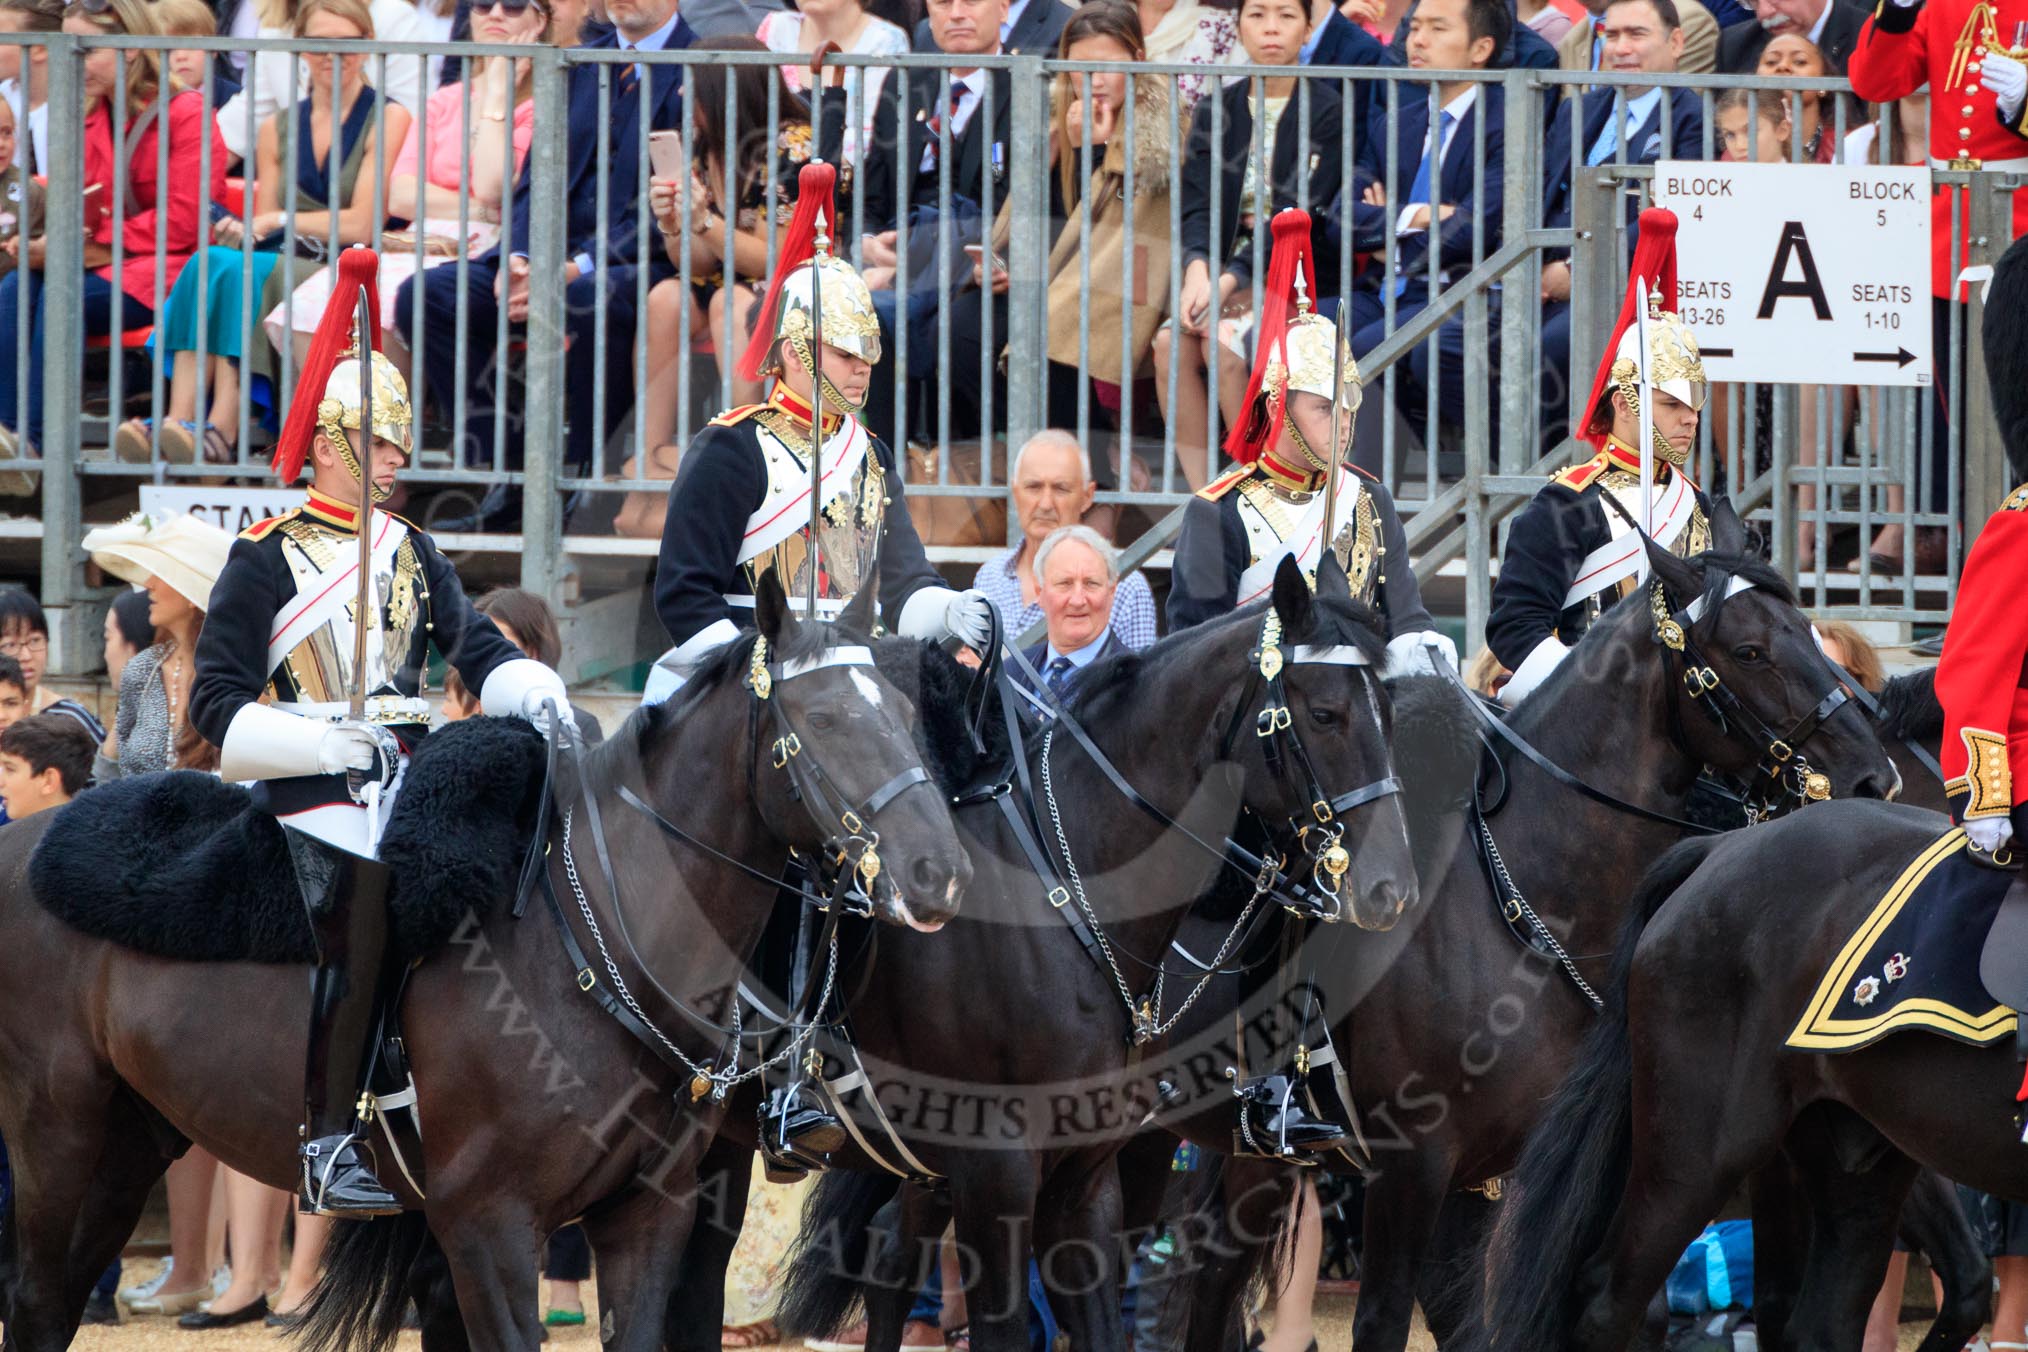 during The Colonel's Review {iptcyear4} (final rehearsal for Trooping the Colour, The Queen's Birthday Parade)  at Horse Guards Parade, Westminster, London, 2 June 2018, 10:56.